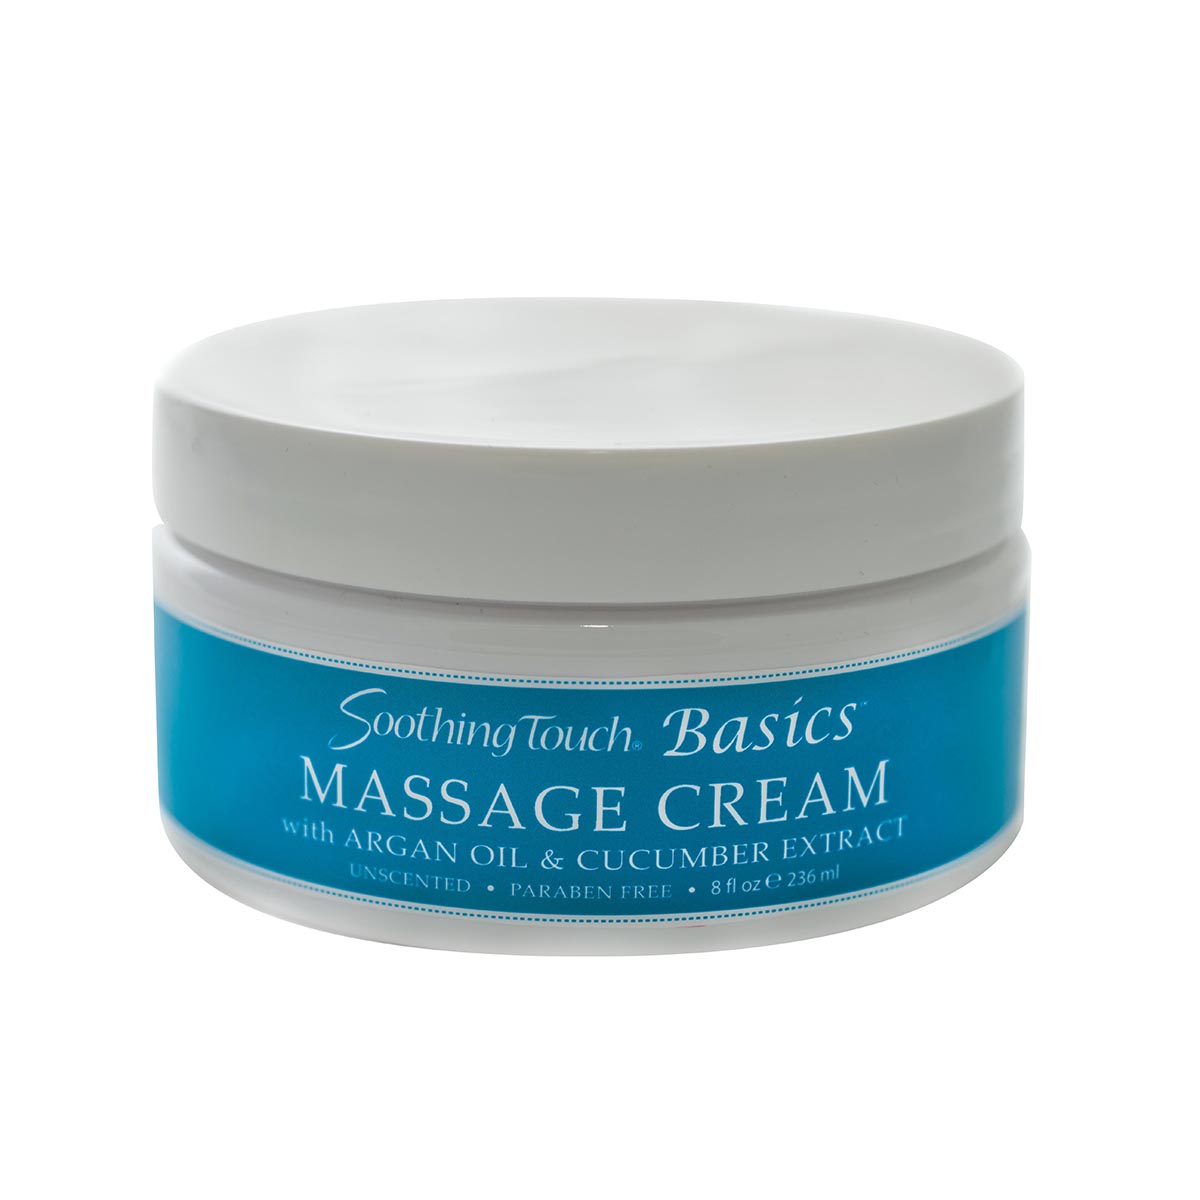 Soothing Touch Basics Cream Massage Creams